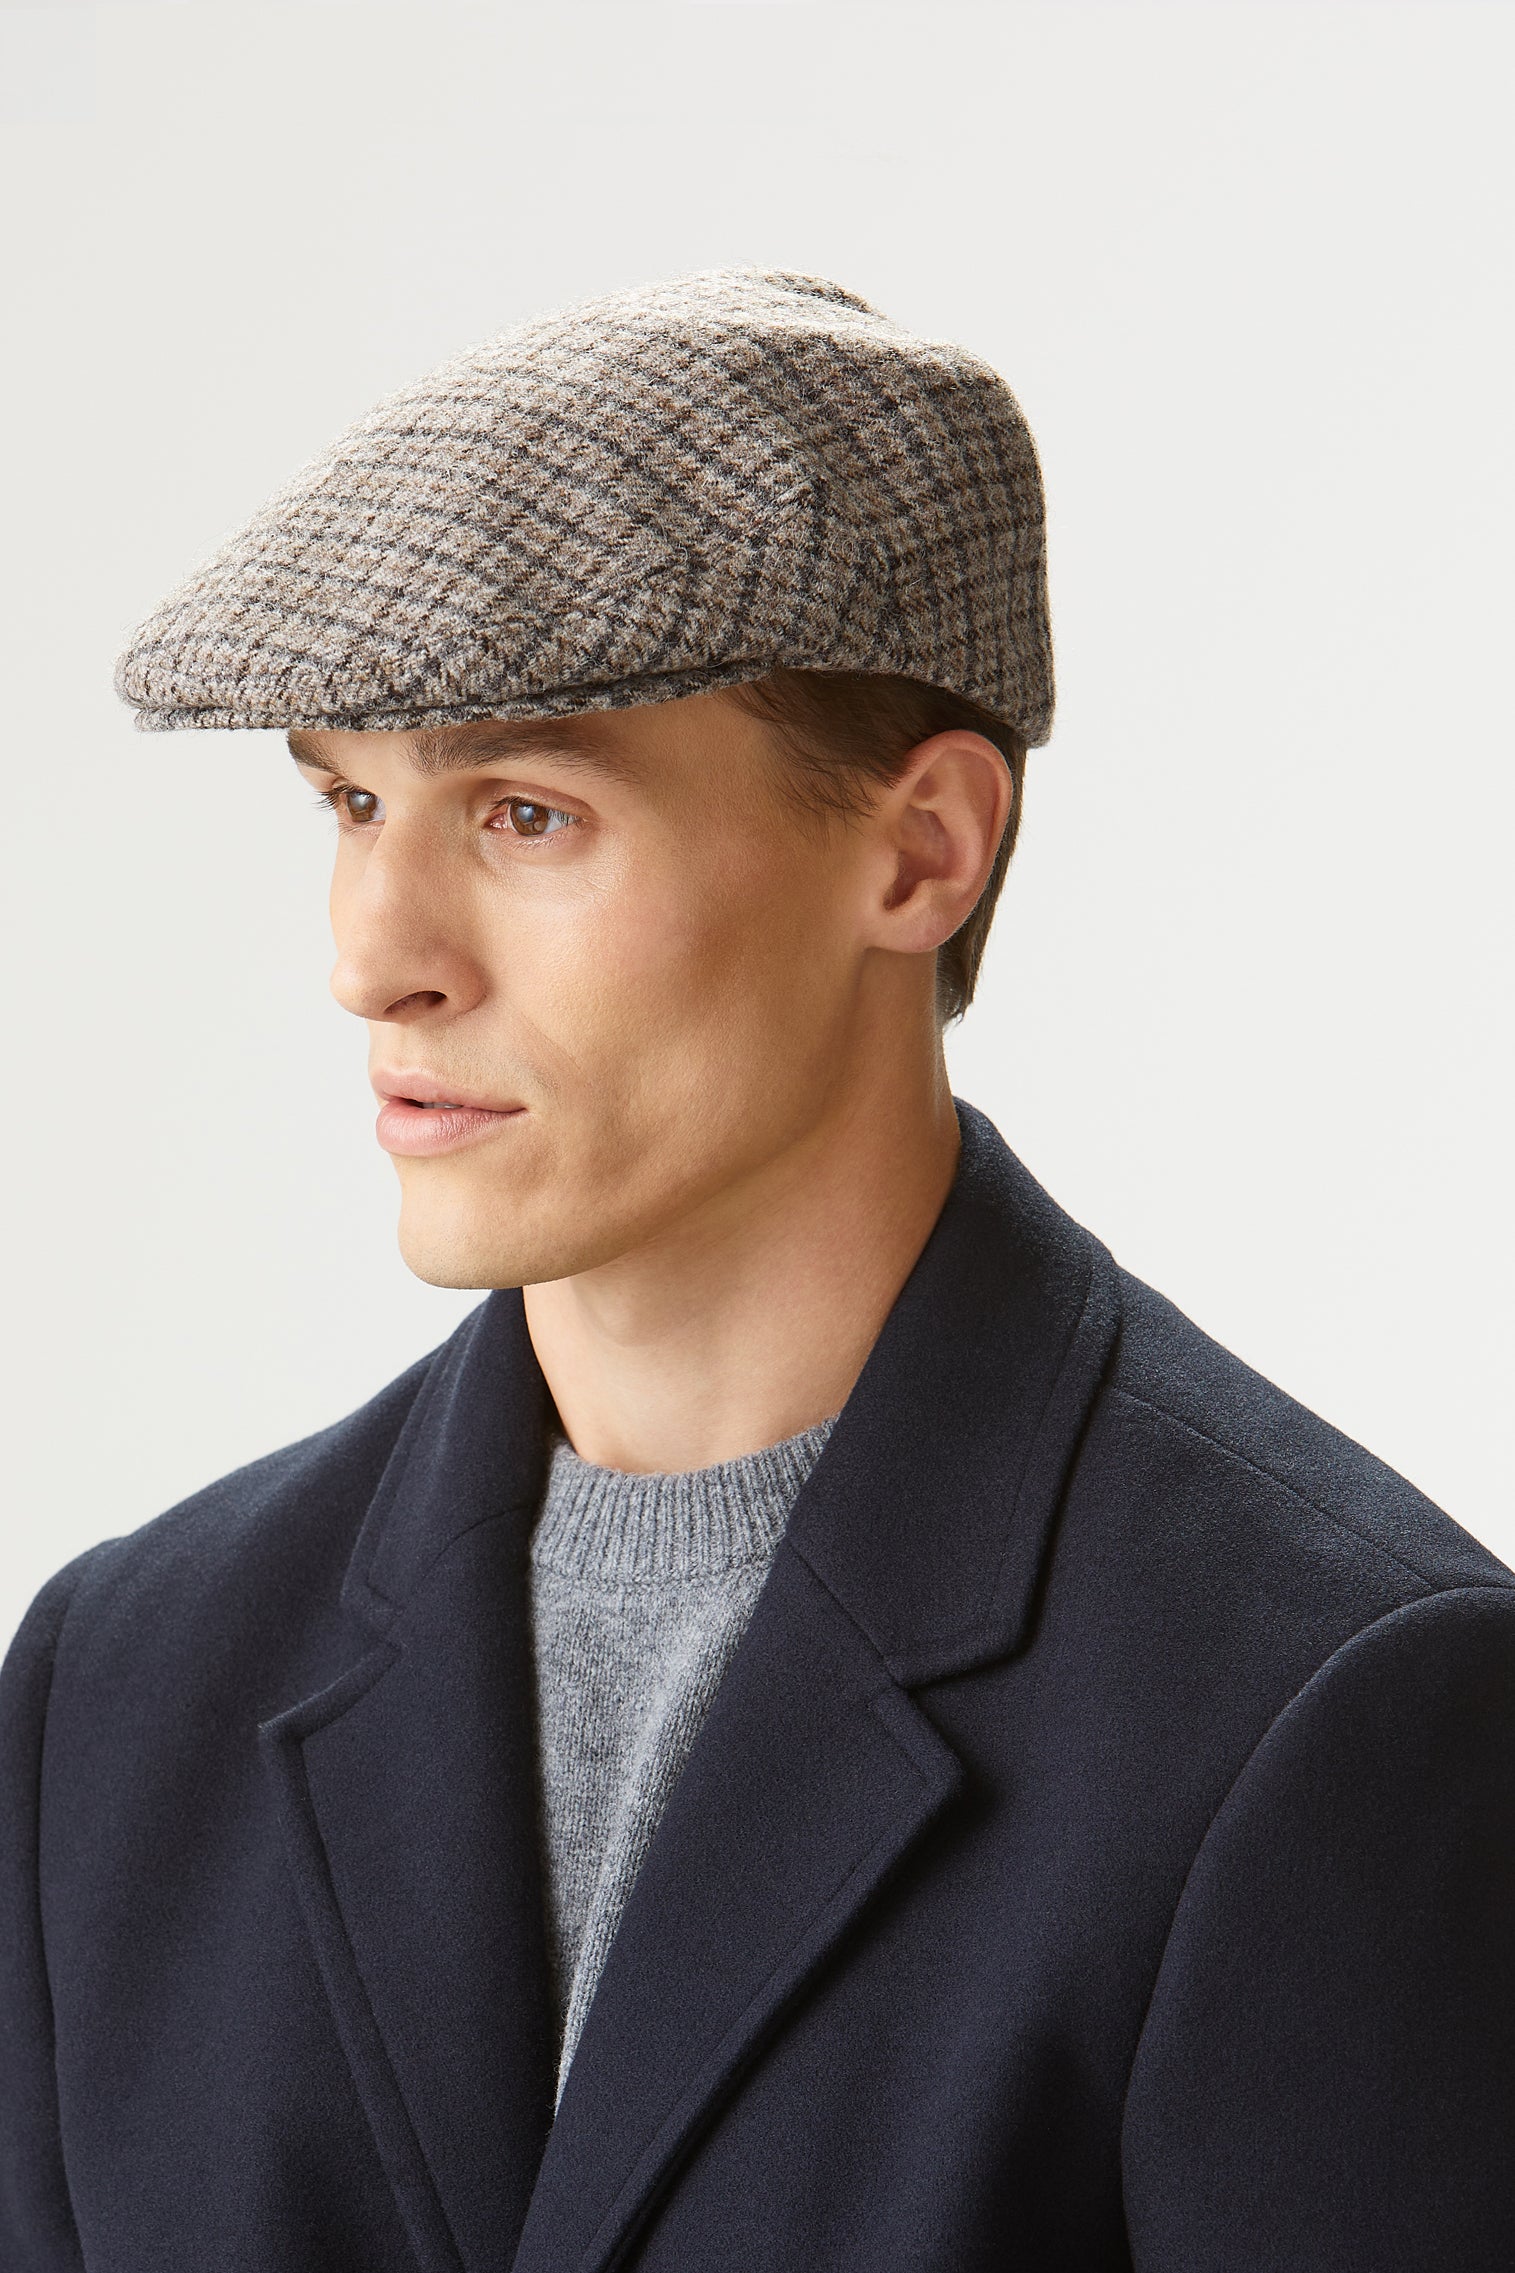 Gill Check Flat Cap - Hats for Tall People - Lock & Co. Hatters London UK